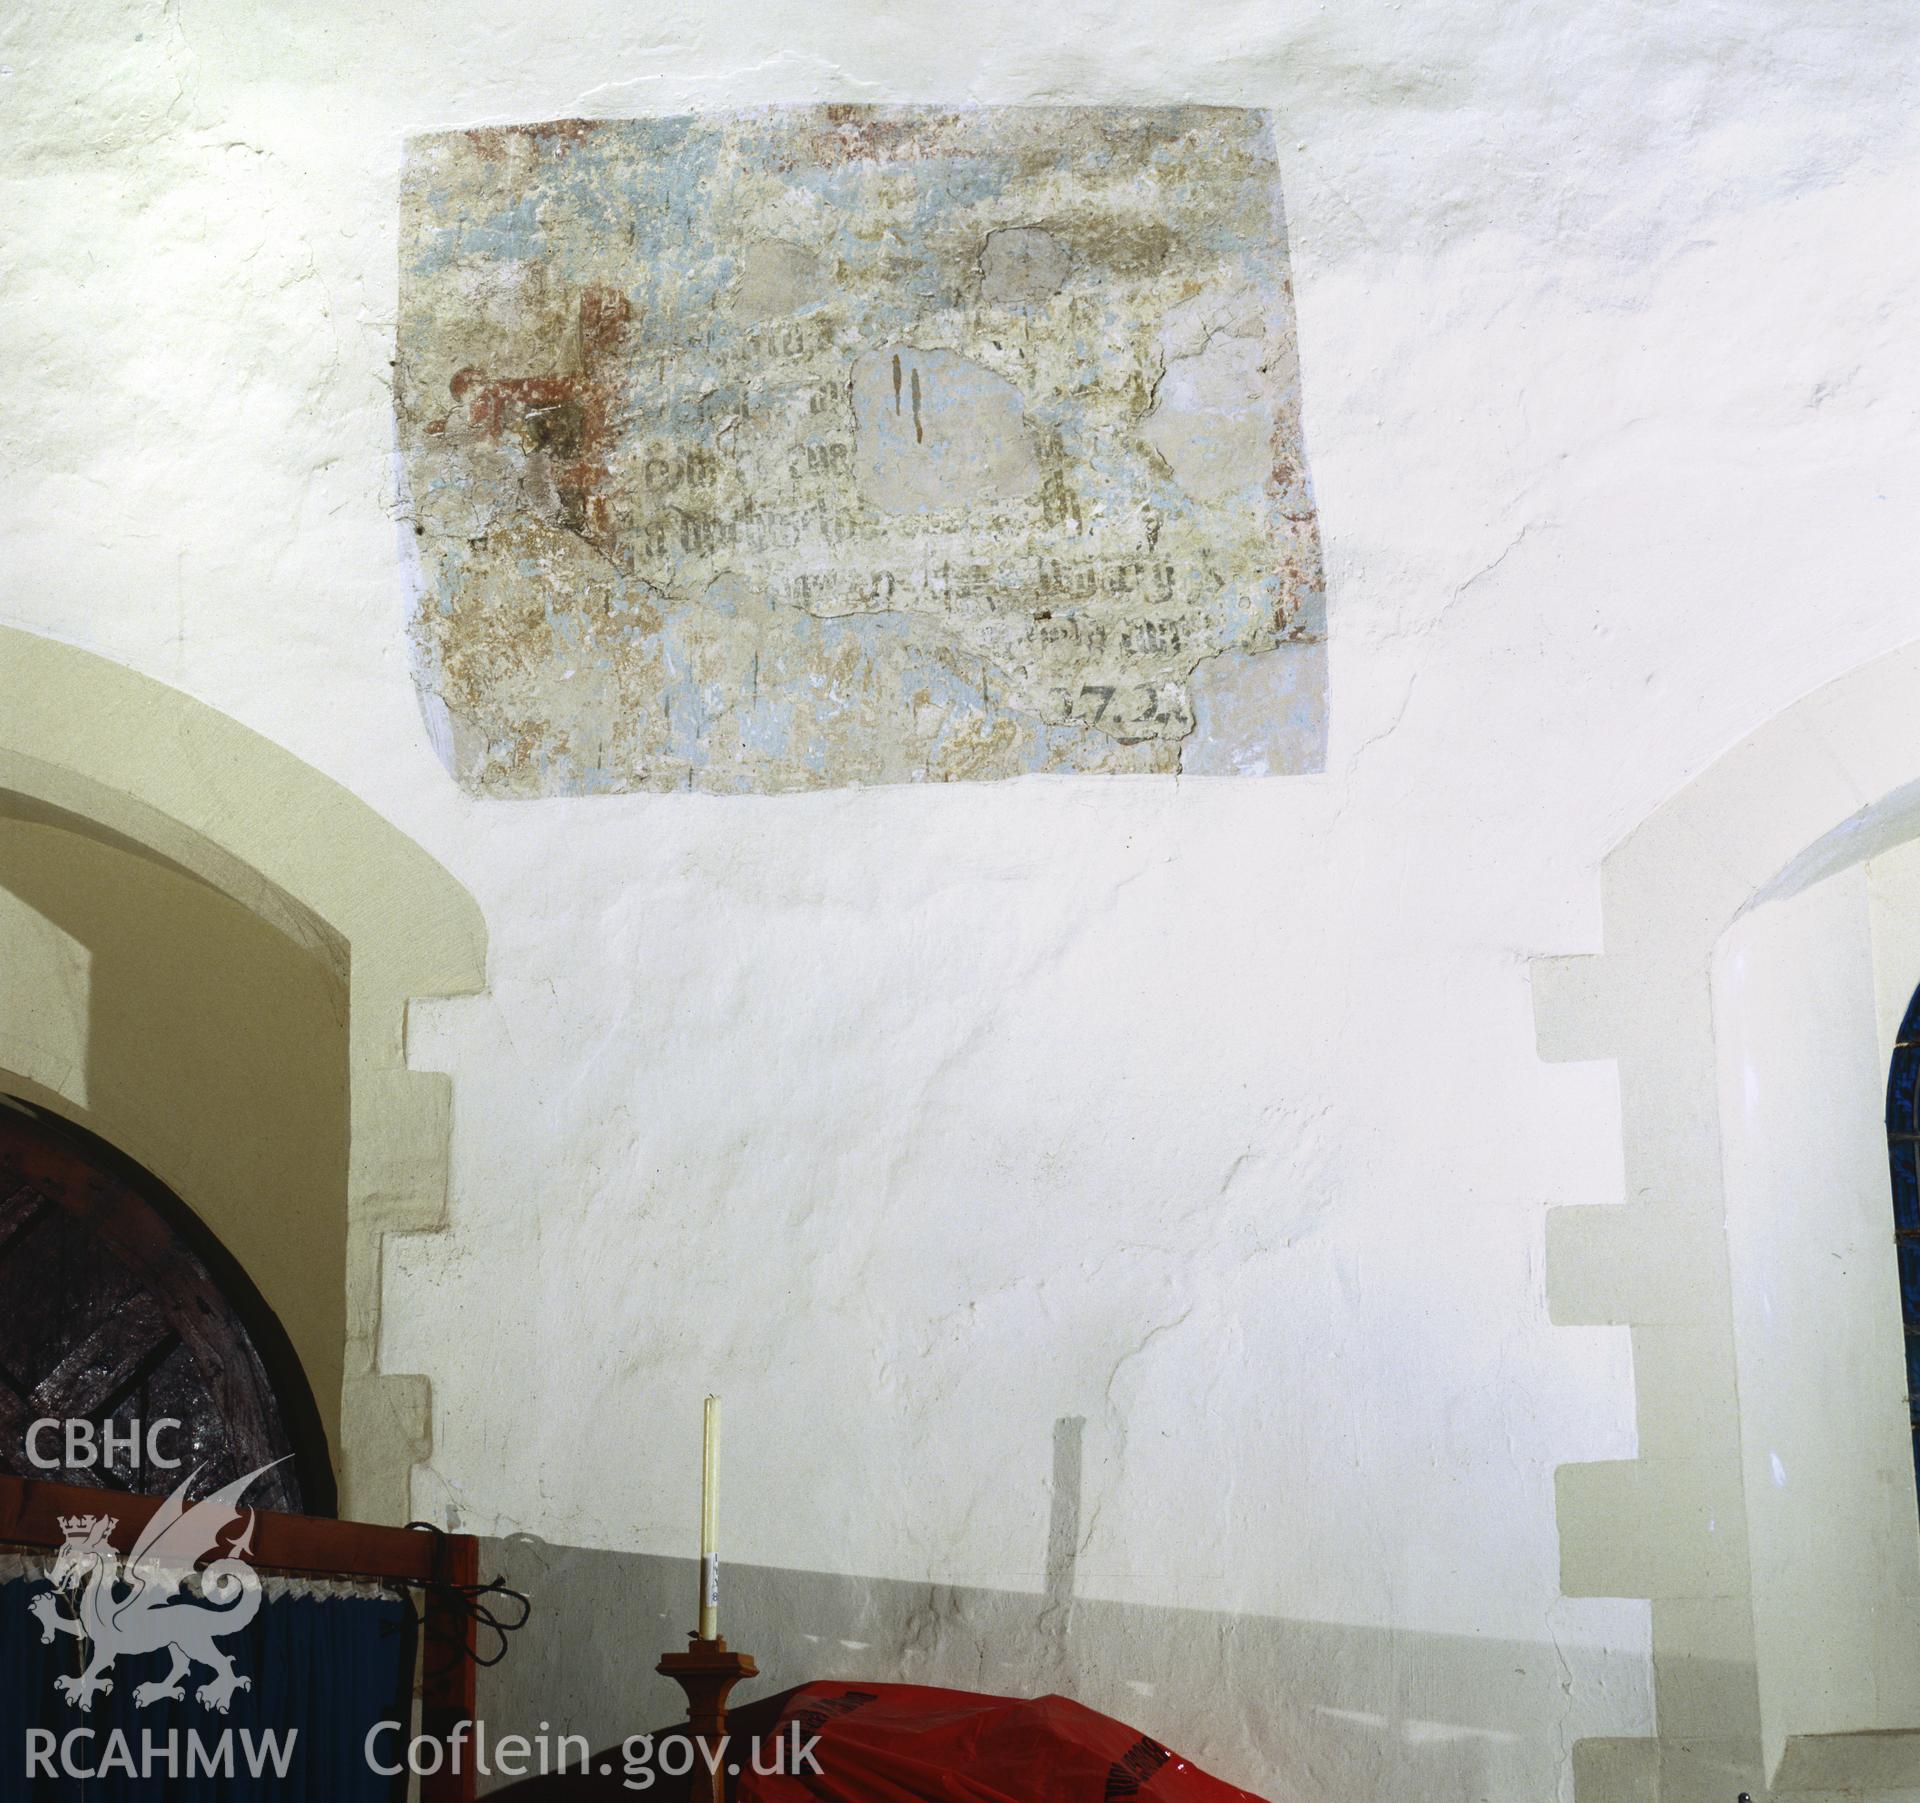 RCAHMW colour transparency of the wallpainting in St Marys Church, Rhuddlan, taken by Iain Wright.